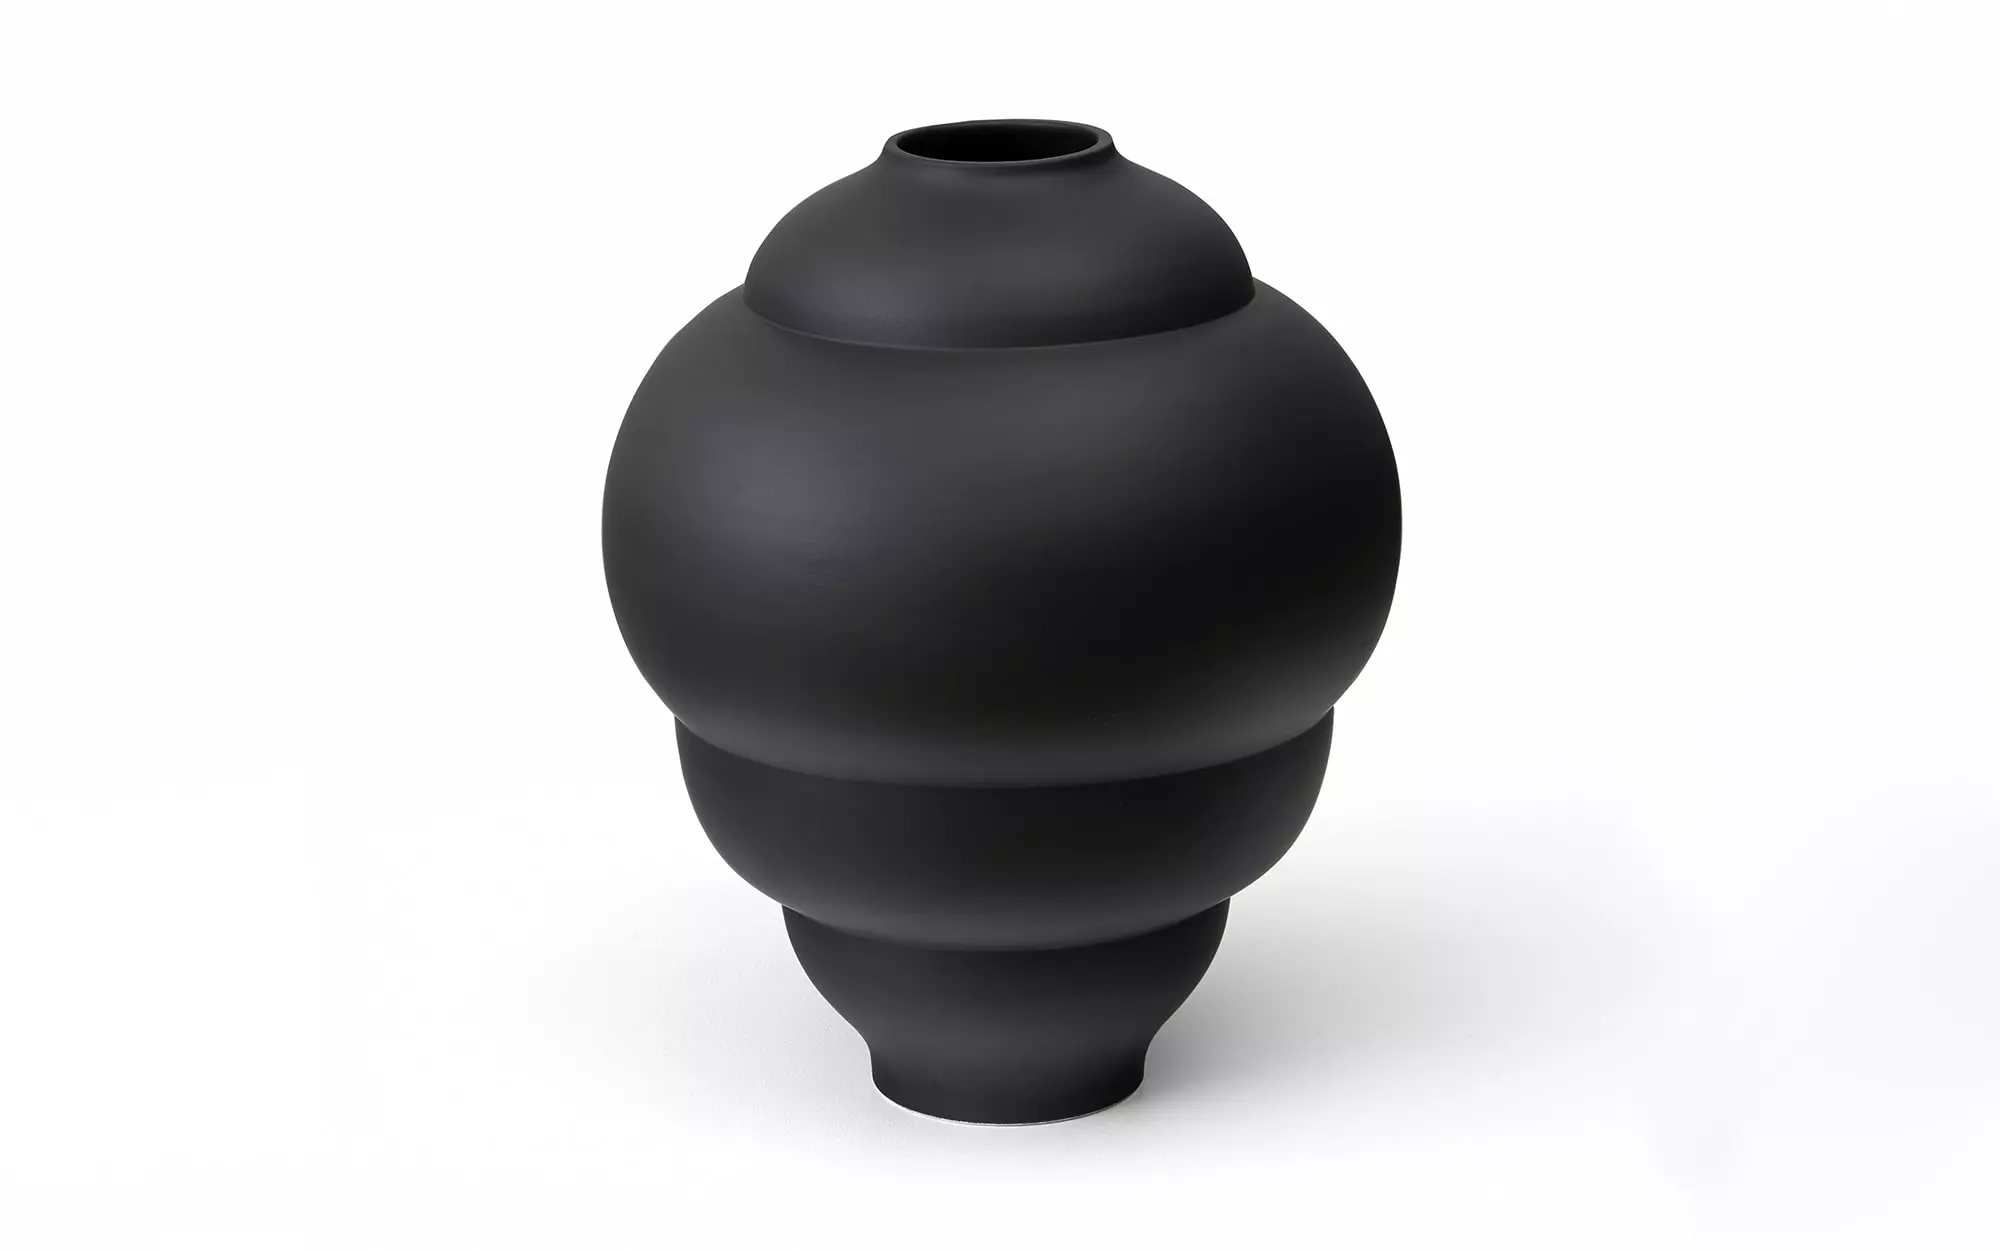 Plump - 3 Vase - Pierre Charpin - @home new chapter .